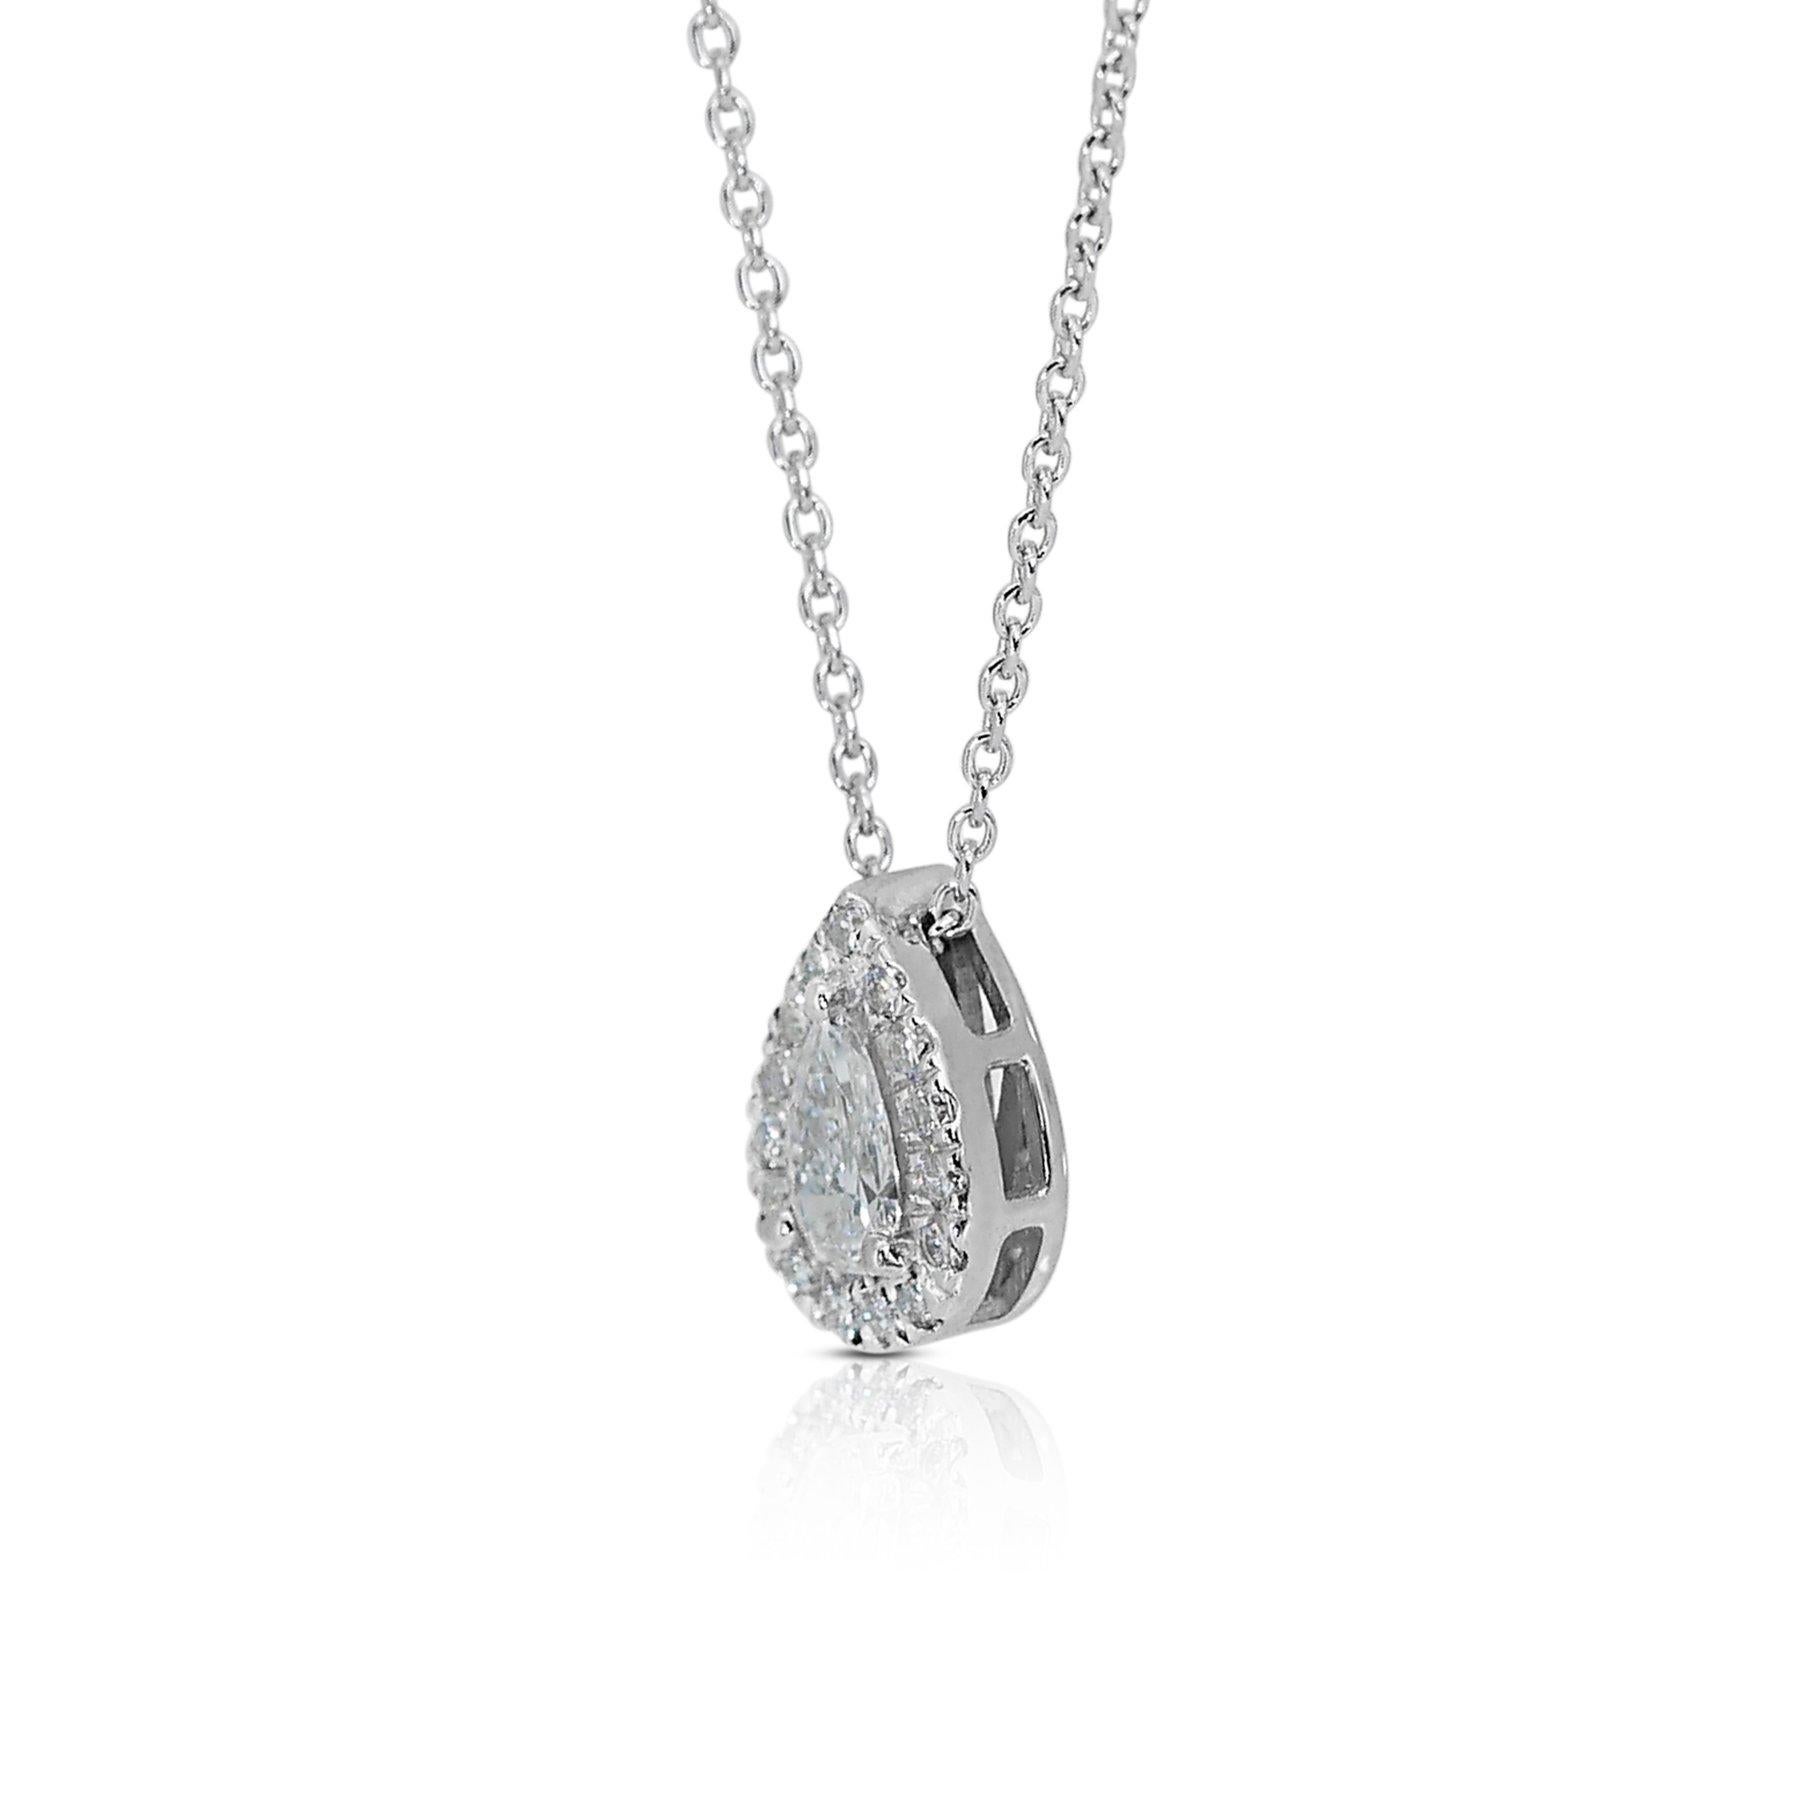 Exquisite Necklace with a radiant 0.3ct Pear Shaped Natural Diamond 1